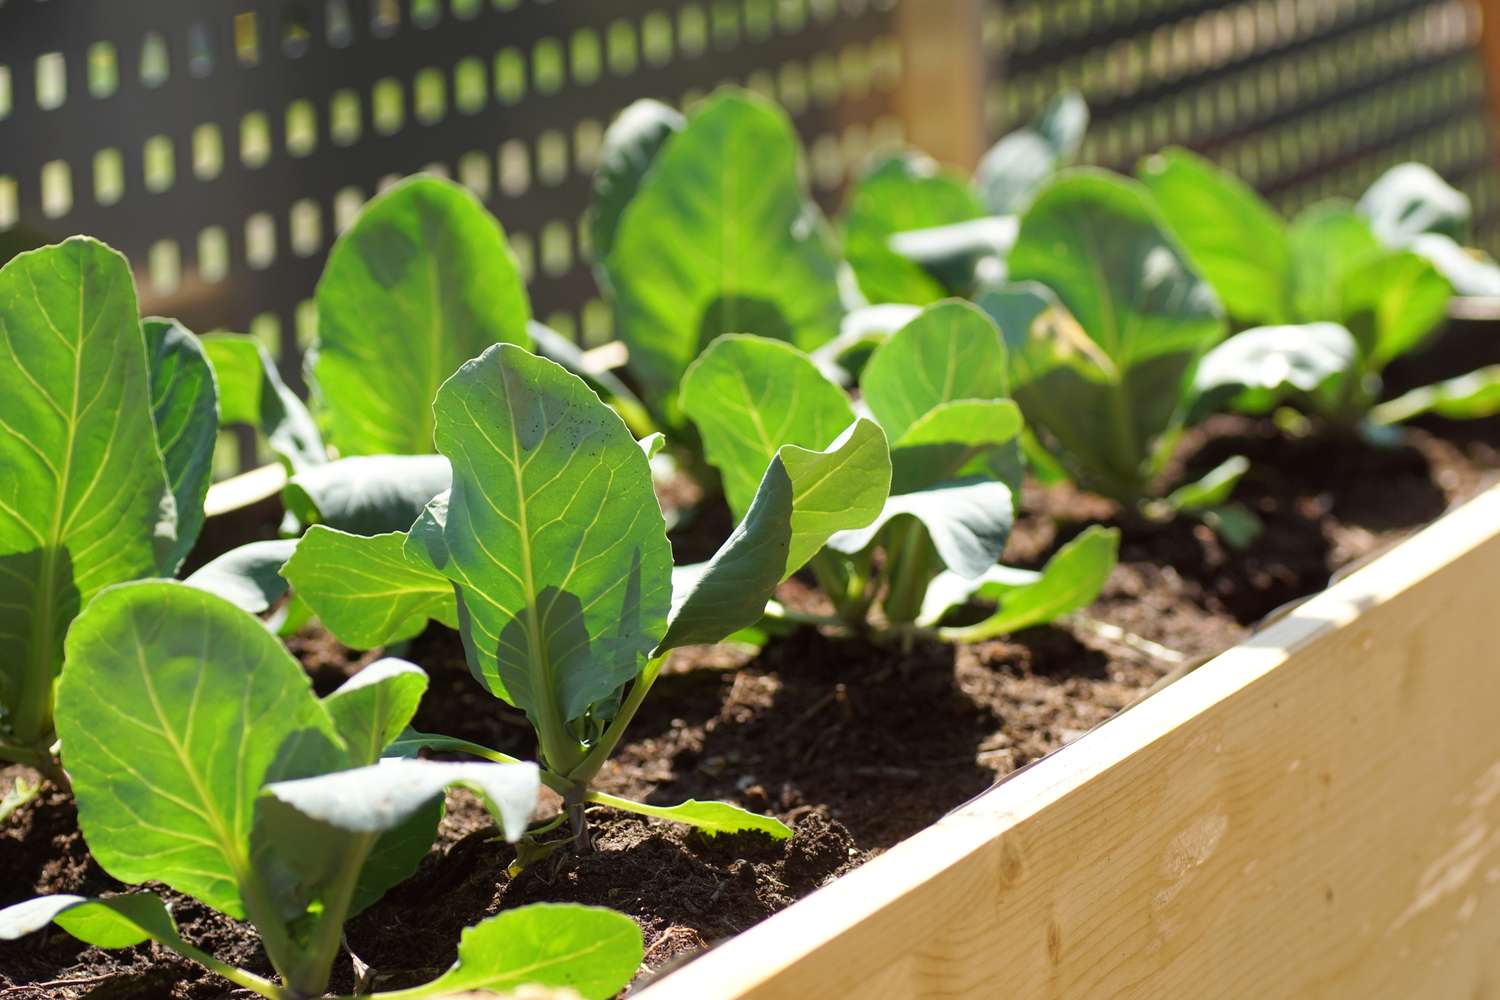 Growing green cabbage and kohlrabi in a raised bed helps prevent root maggots